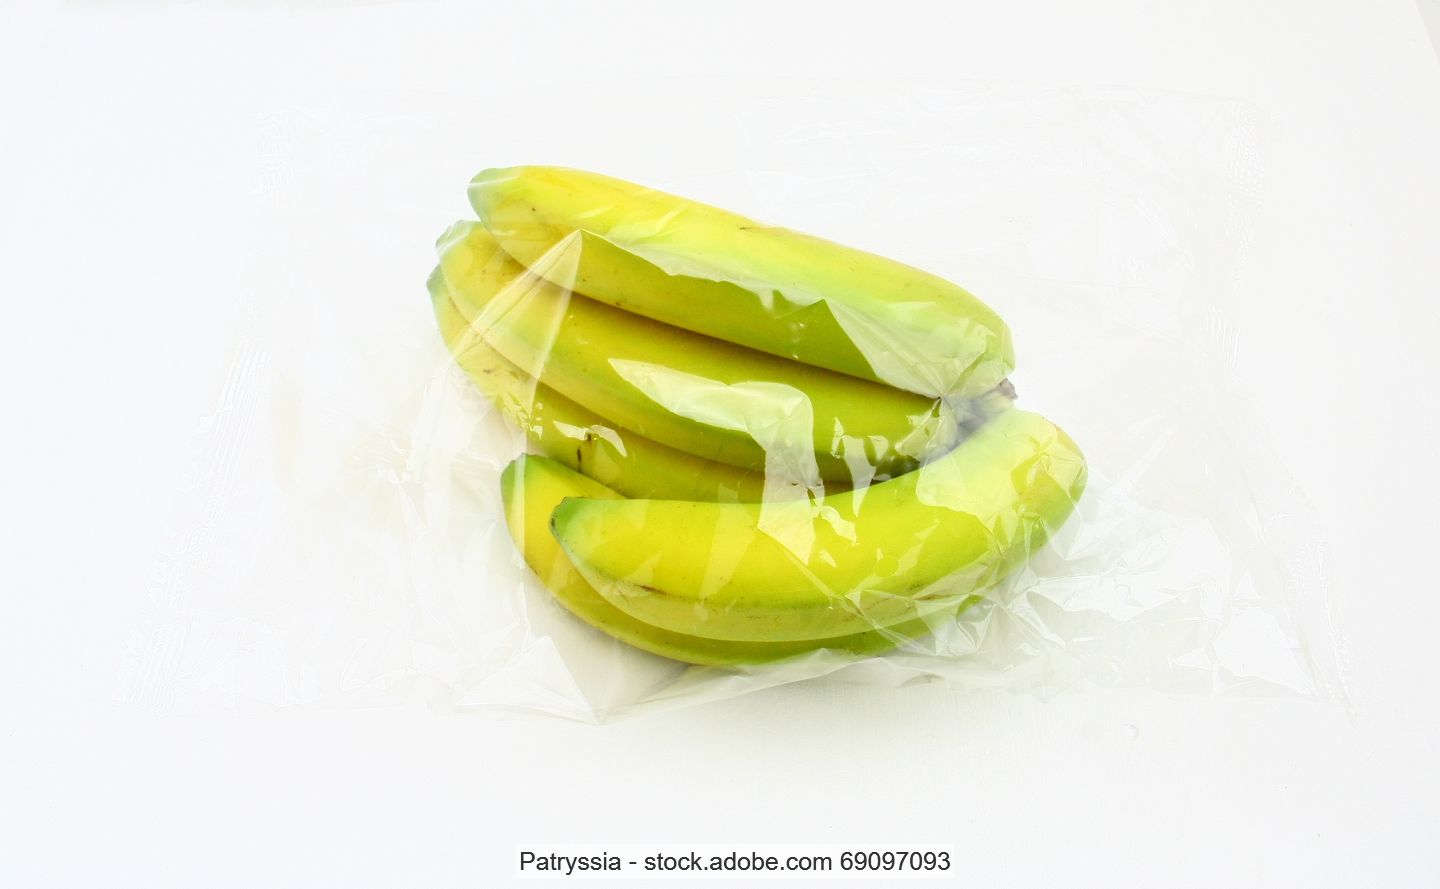 Stock photo of a bunch of bananas wrapped in a clear plastic bag lying in a white surface.